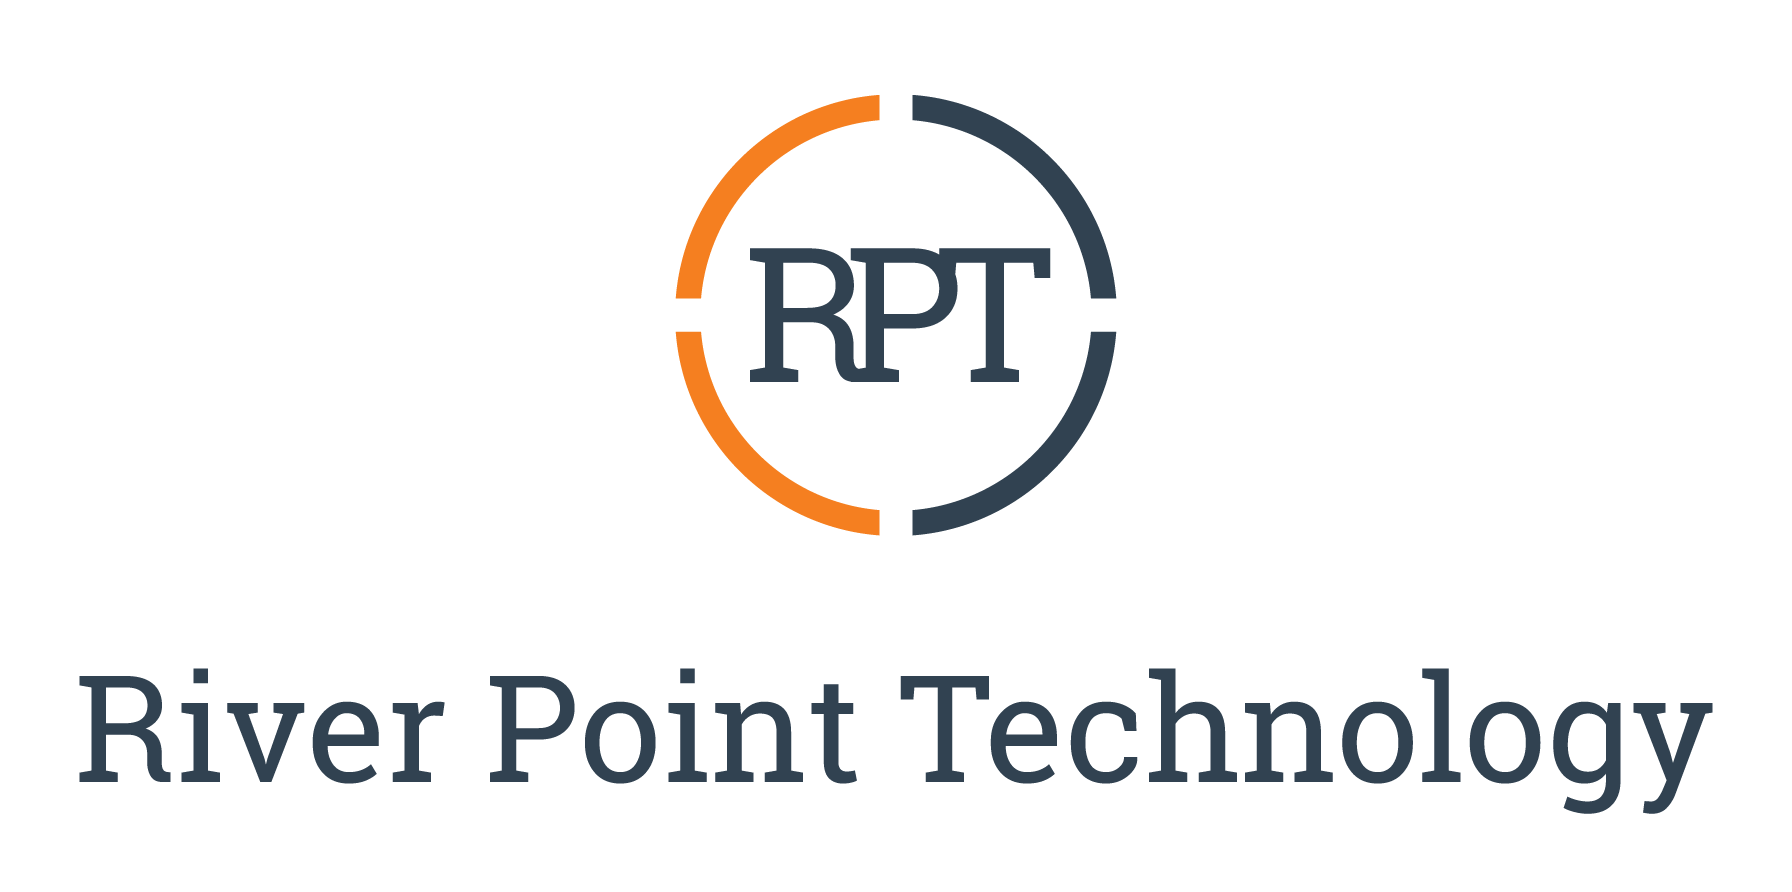 River Point Technology